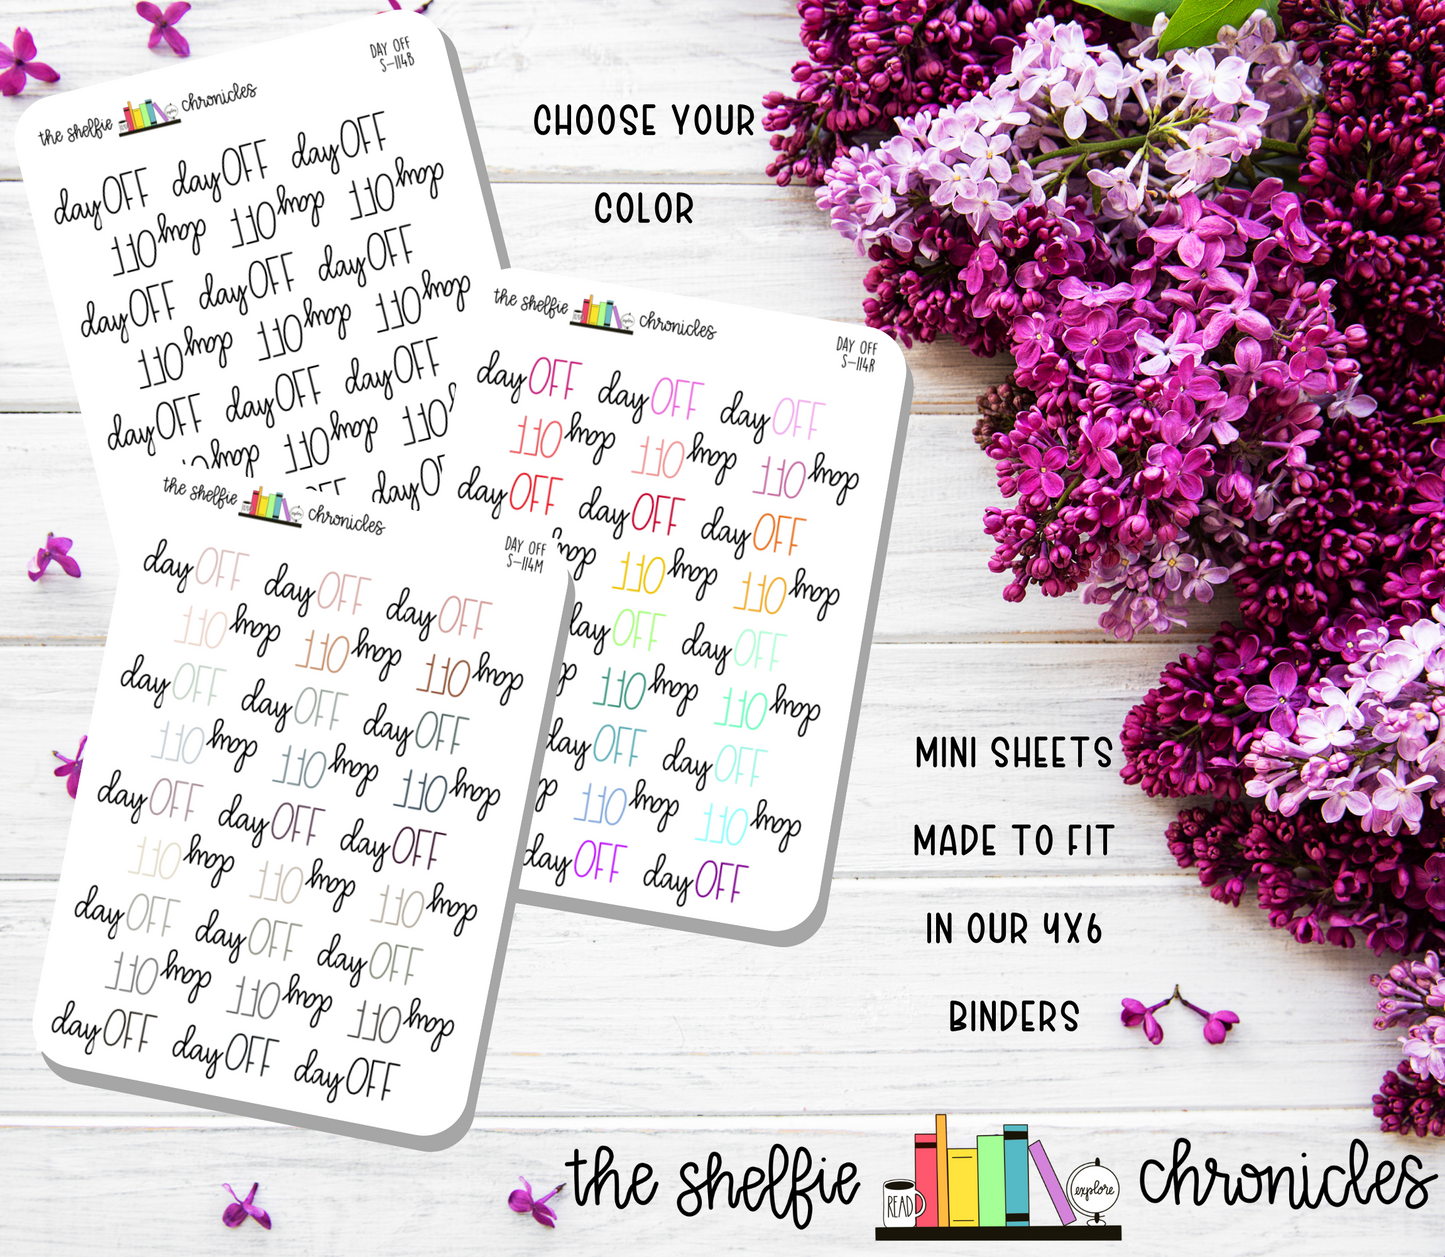 S 114 - Day Off - Hand Lettered - Choose Your Color - Die Cut Stickers - Repositionable Paper - Perfect For Planners